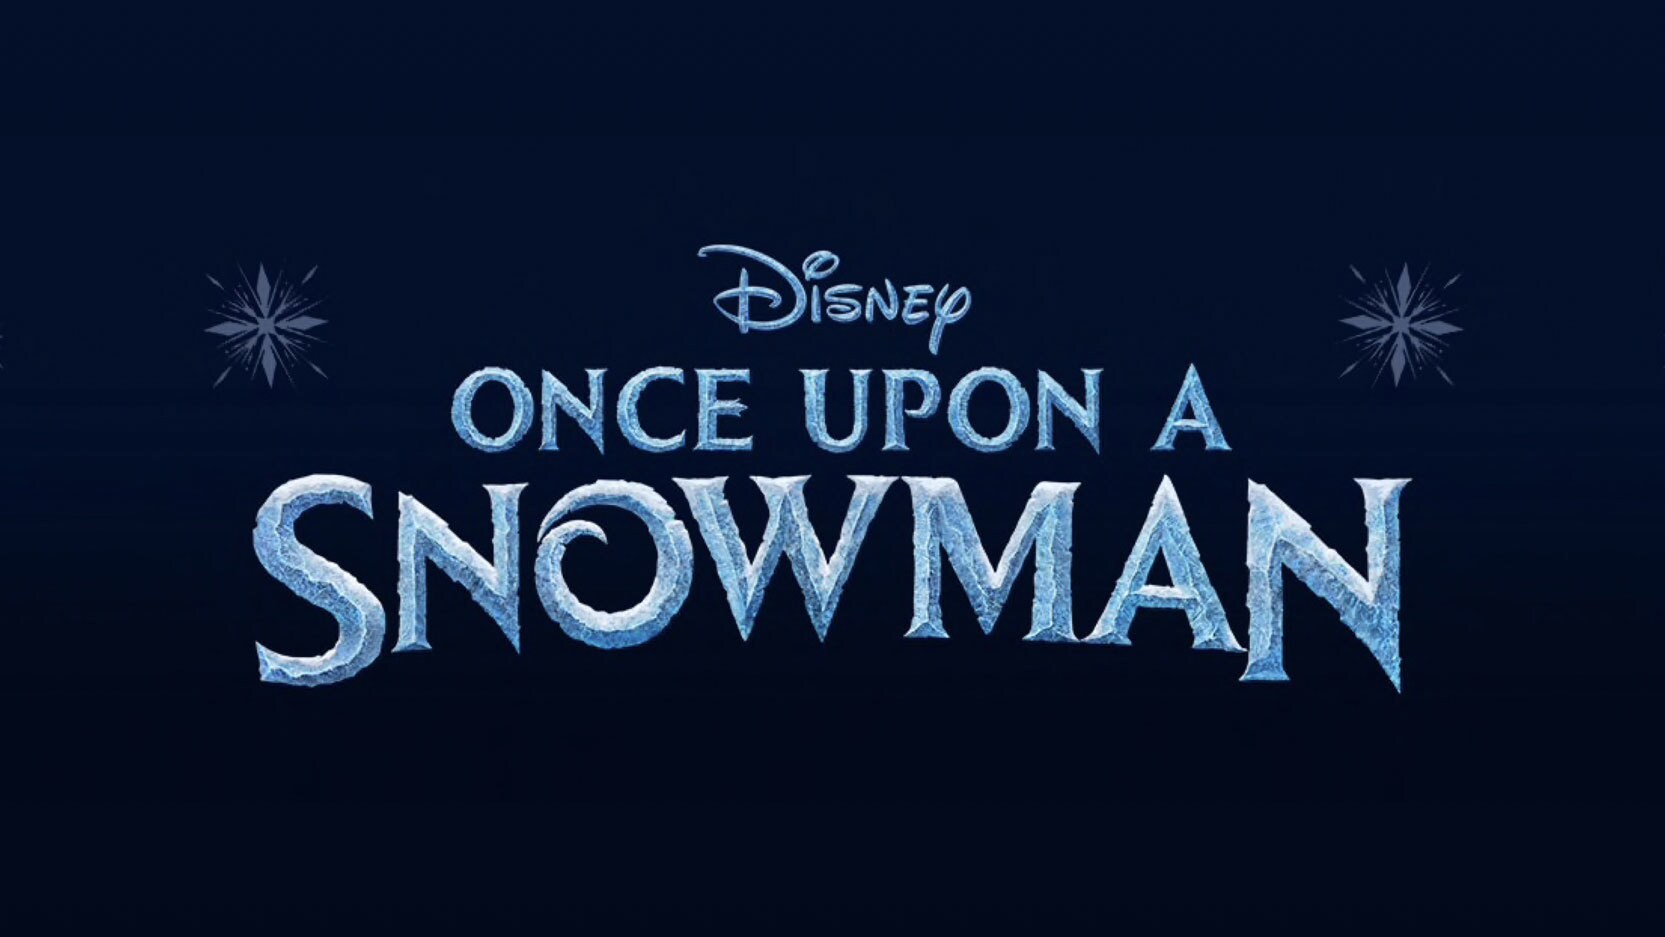 The previously untold origins of Olaf are revealed in the all-new short “Once Upon a Snowman”